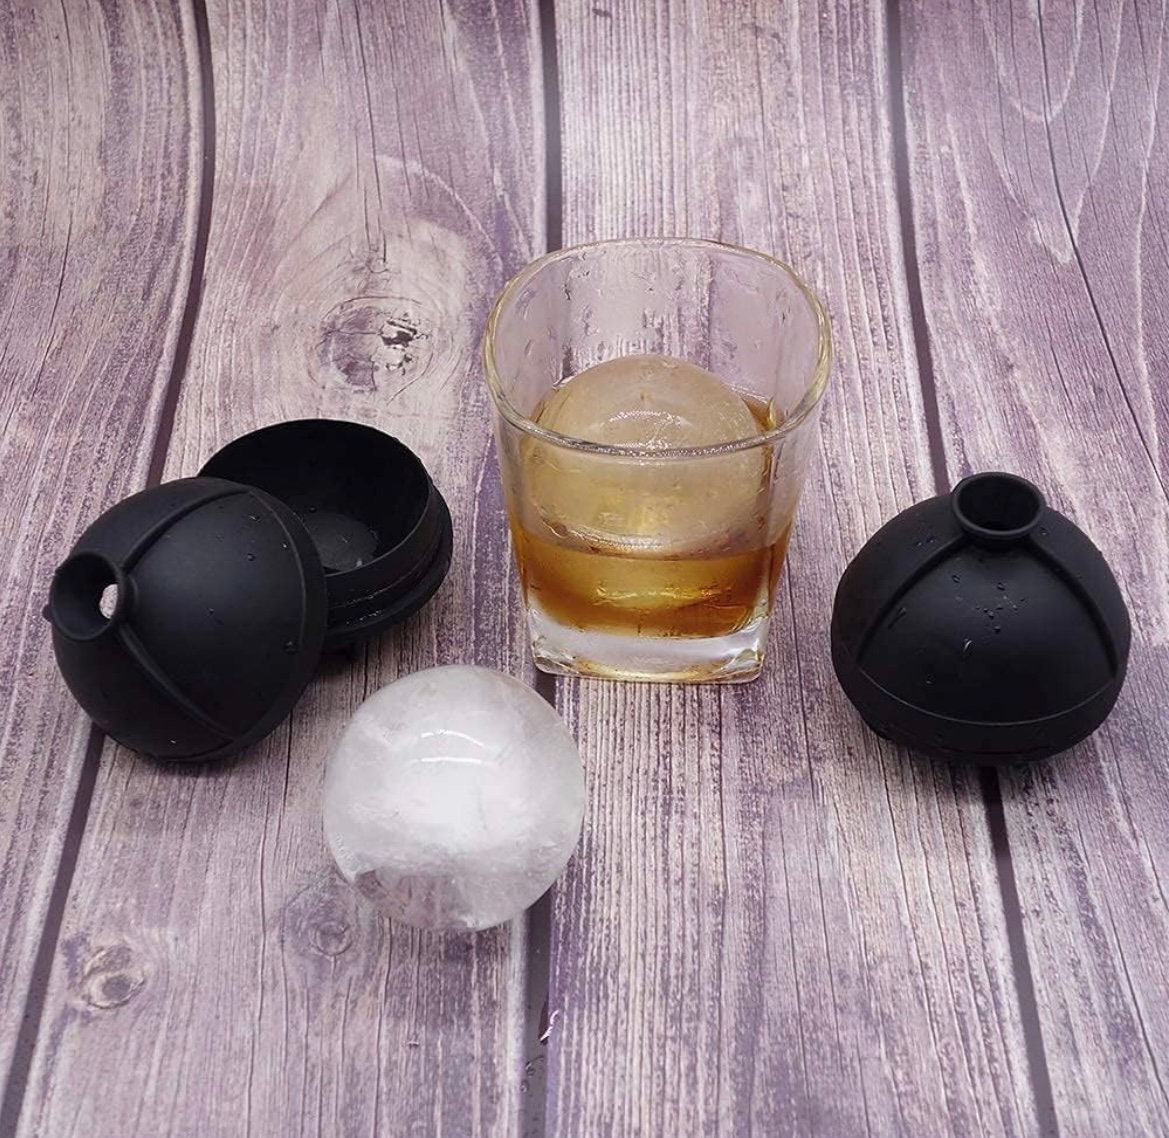 Peaked Crystal Whiskey Glass & Ice Ball Mould Set